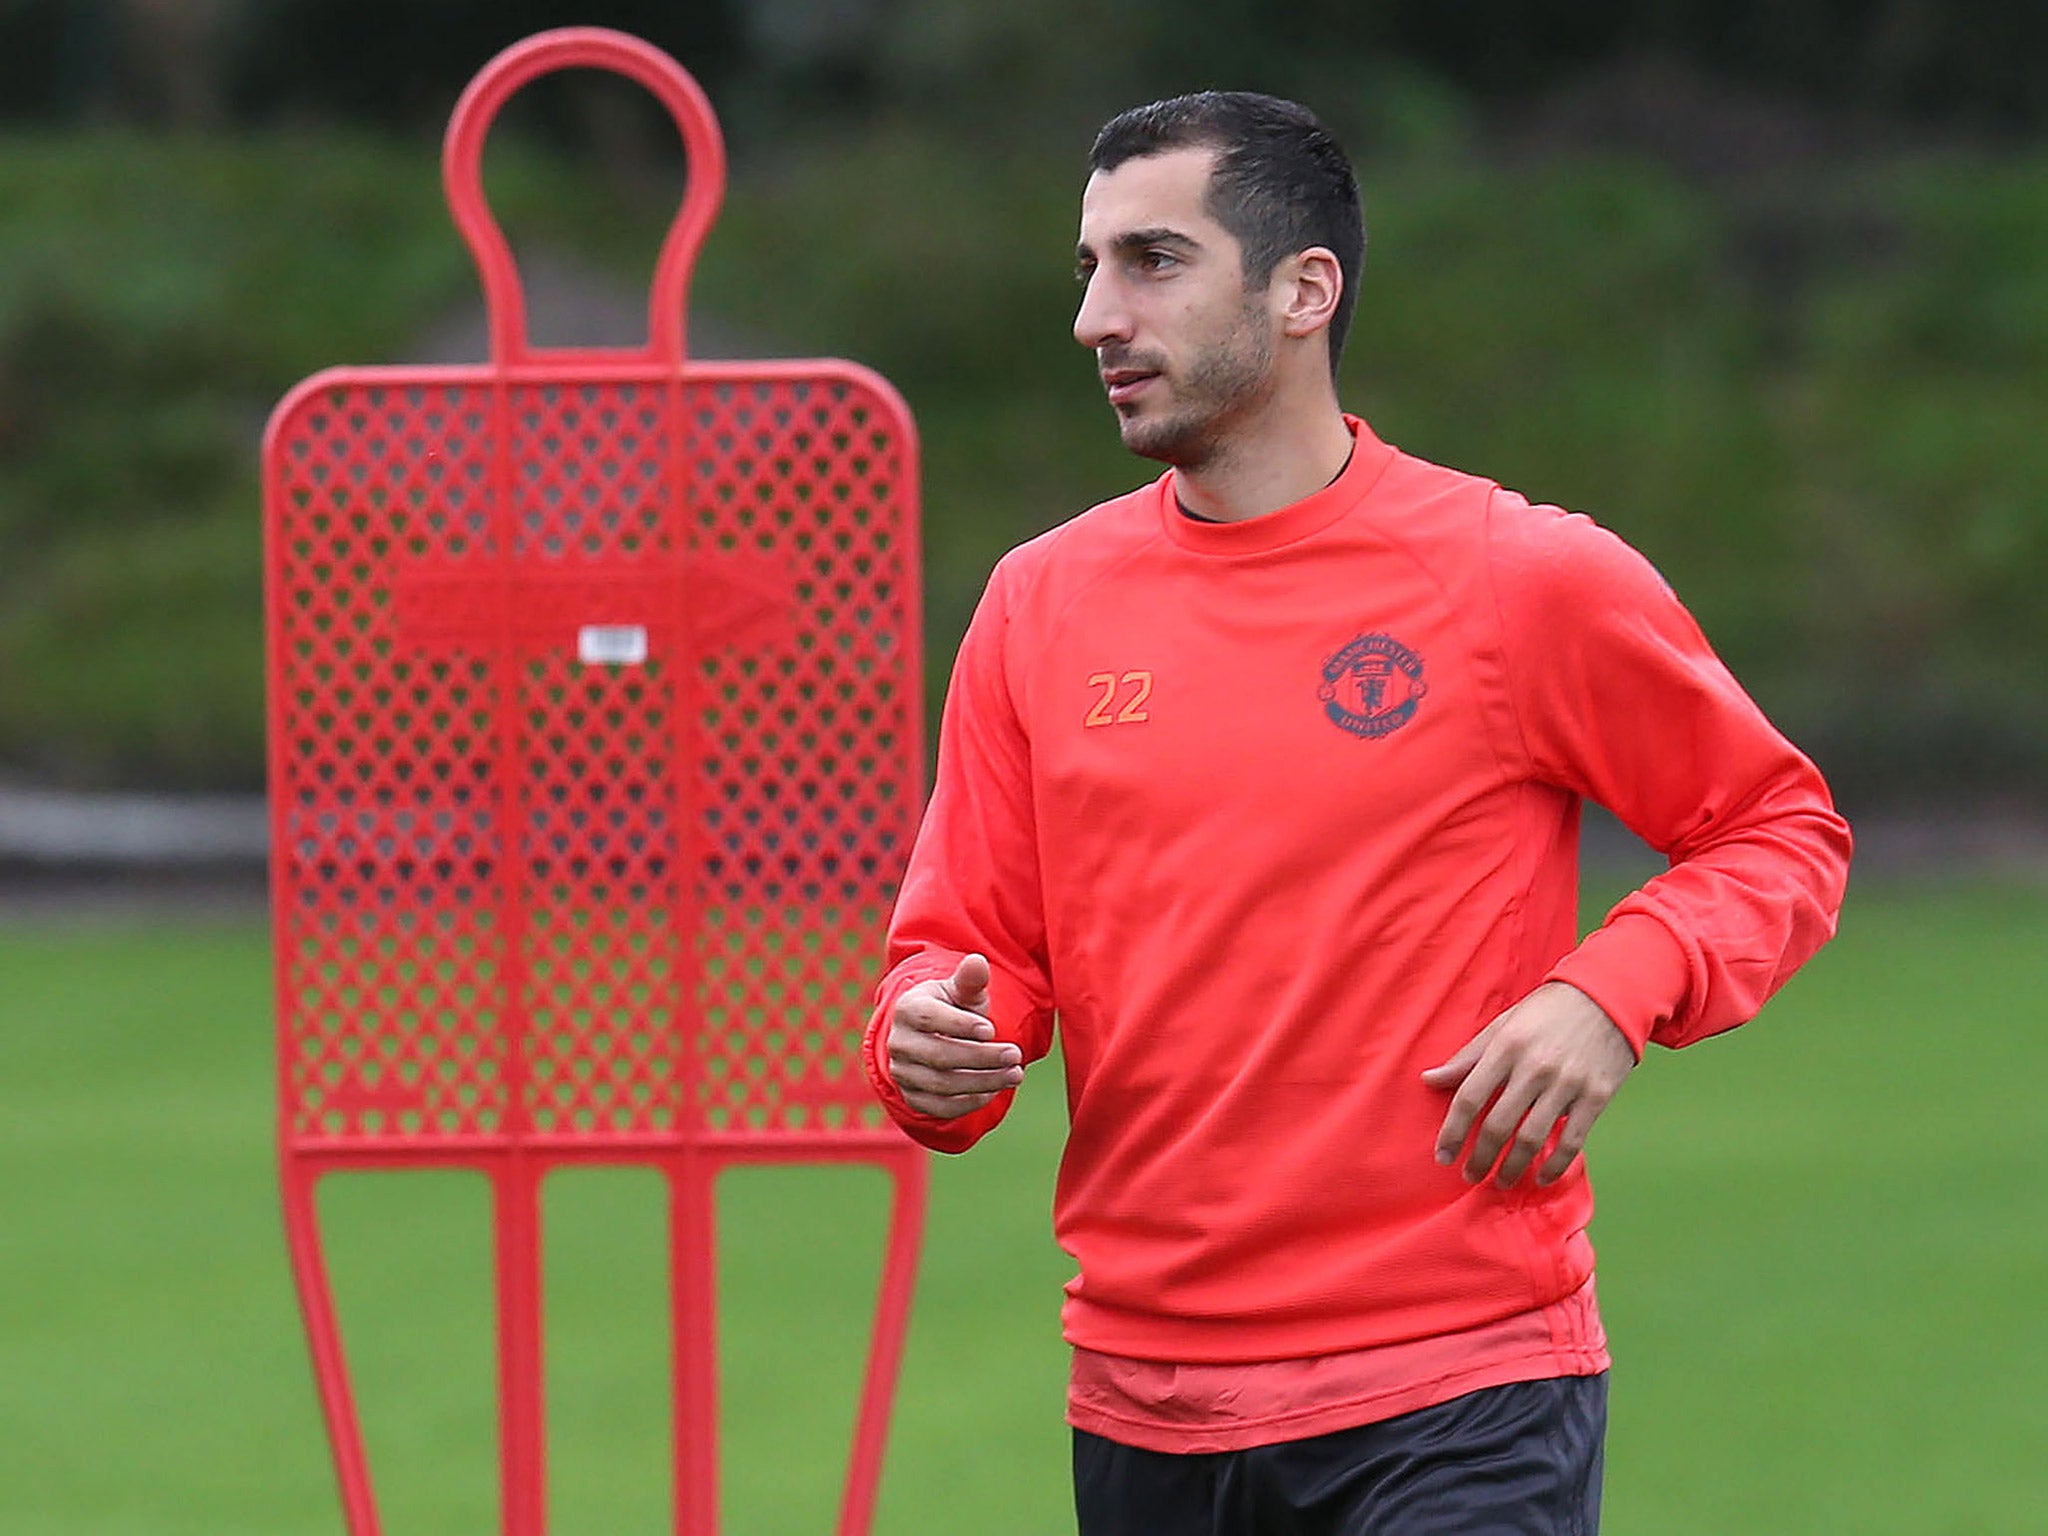 Henrikh Mkhitaryan was left out of Manchester United's squad to face Fenerbahce